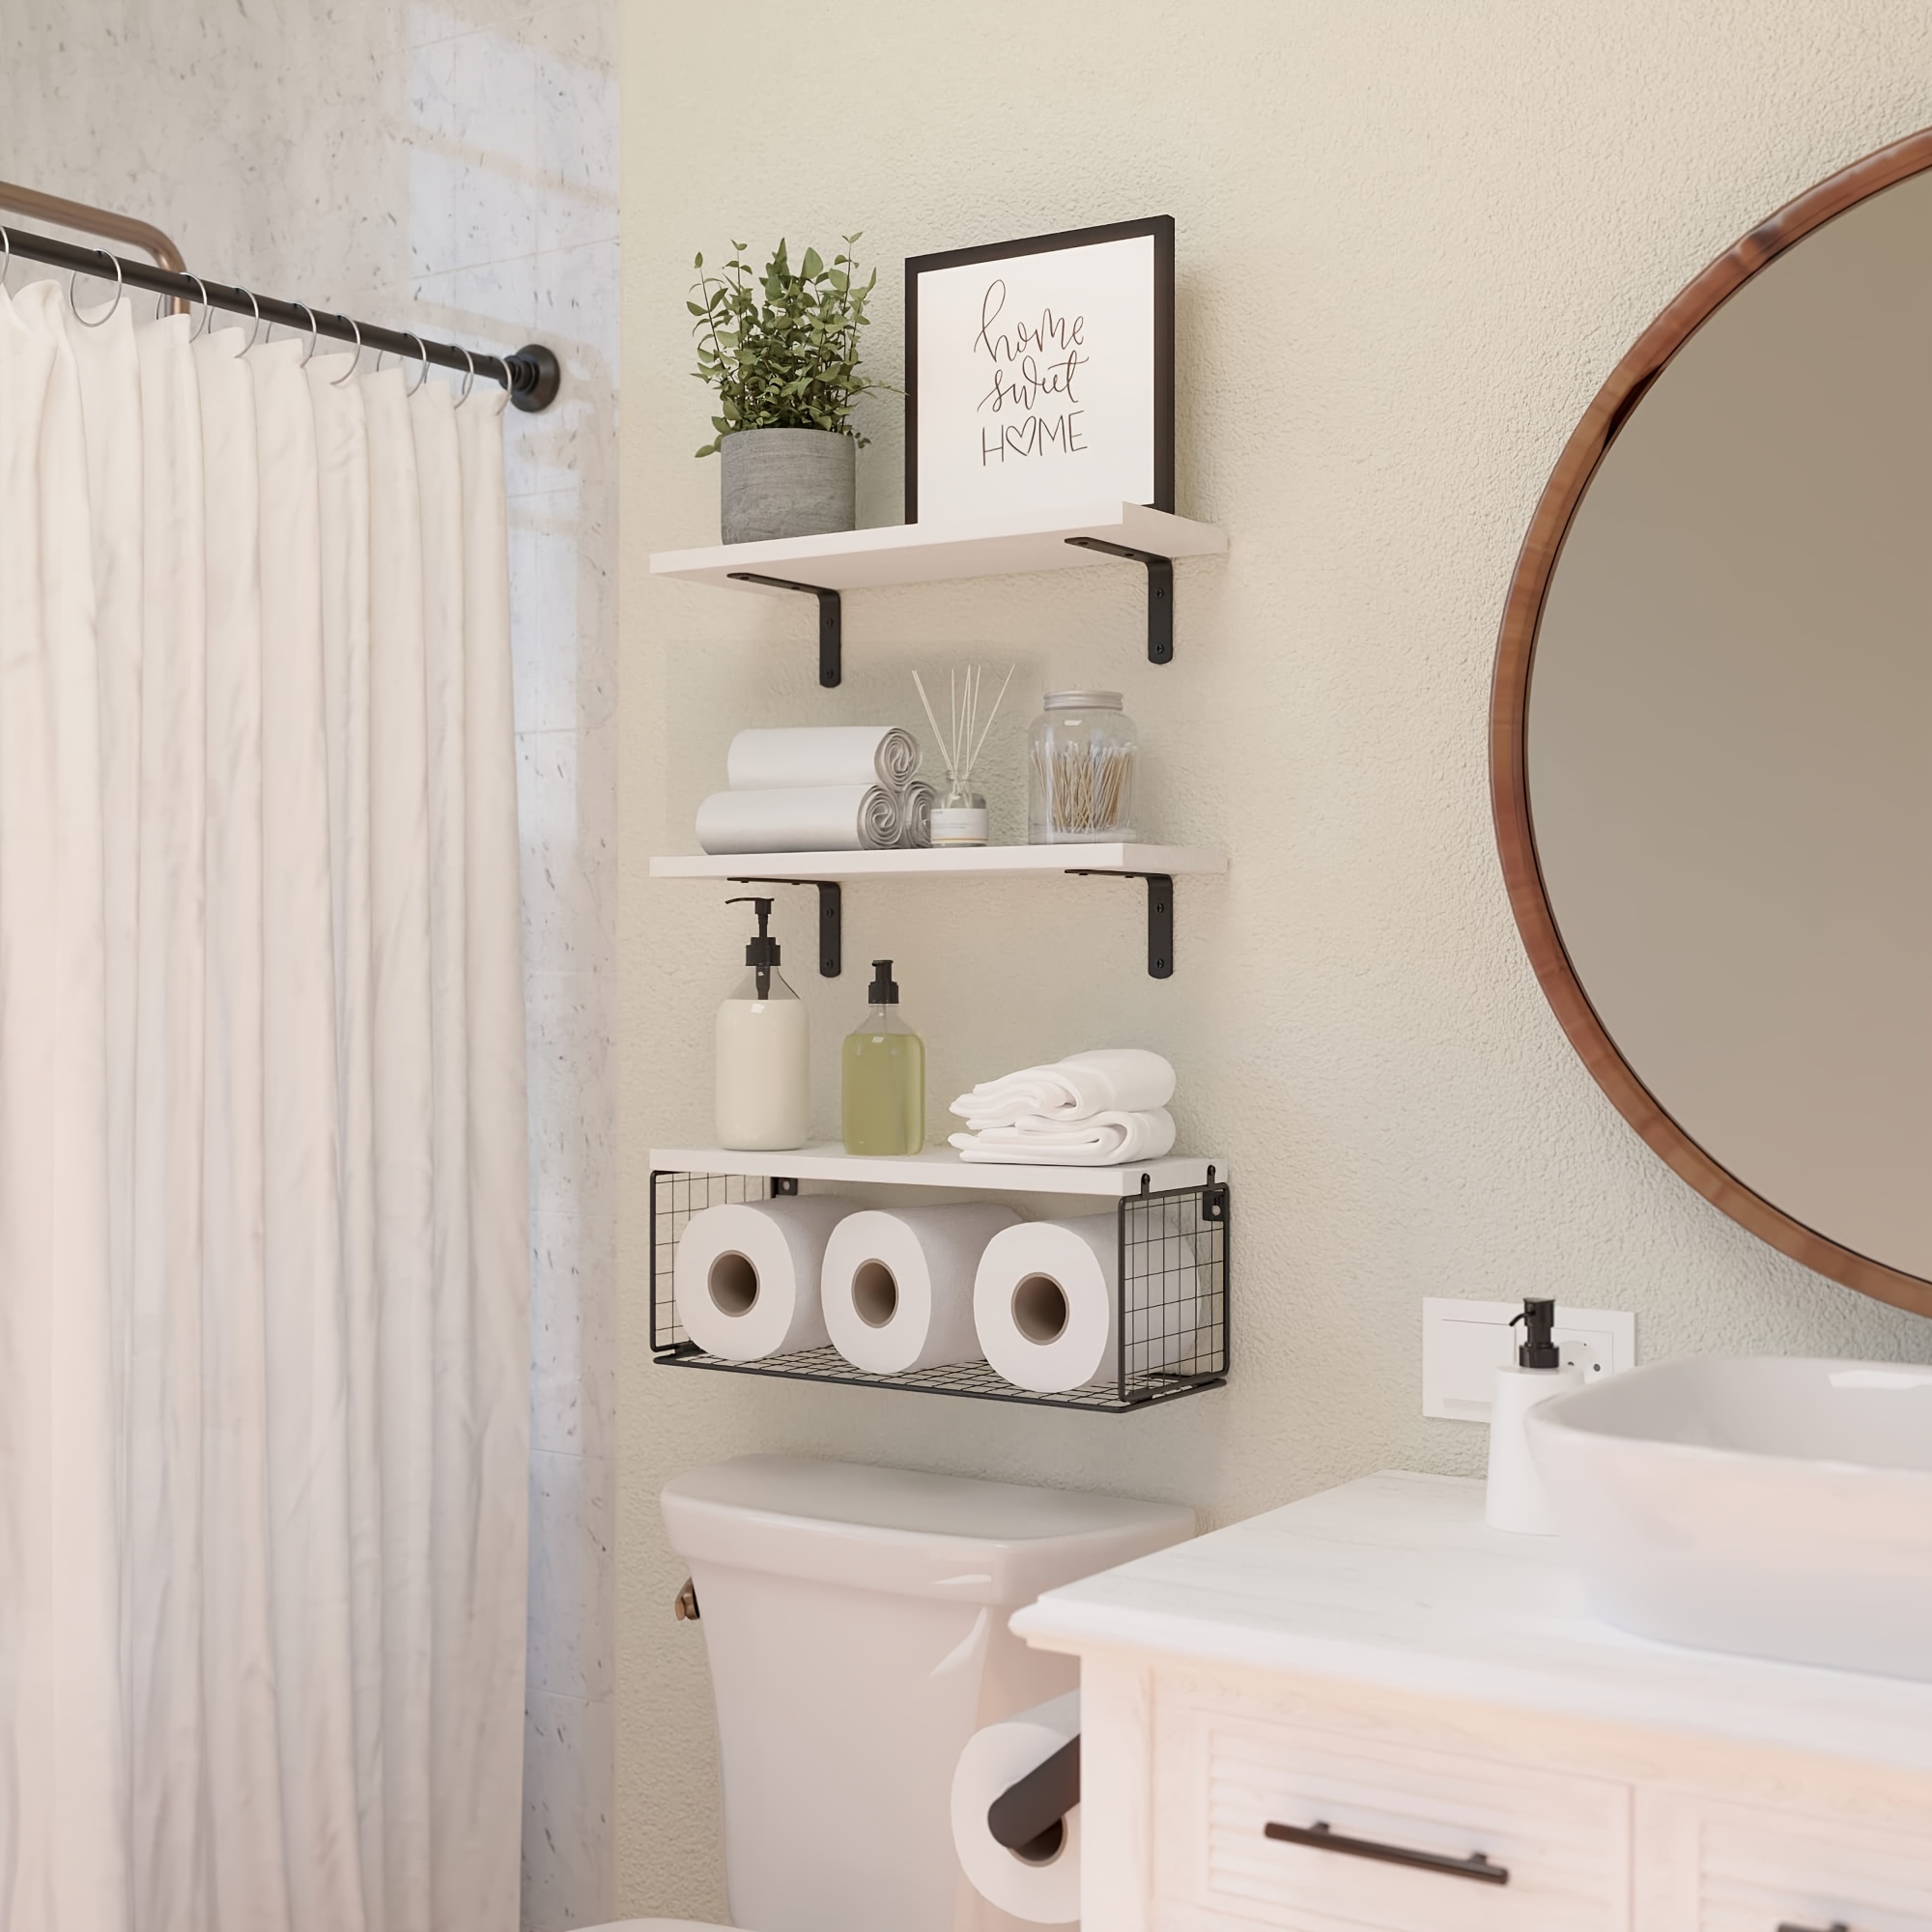 Bathroom Wall Shelf,Wall Shelves Over The Toilet Storage Fit for